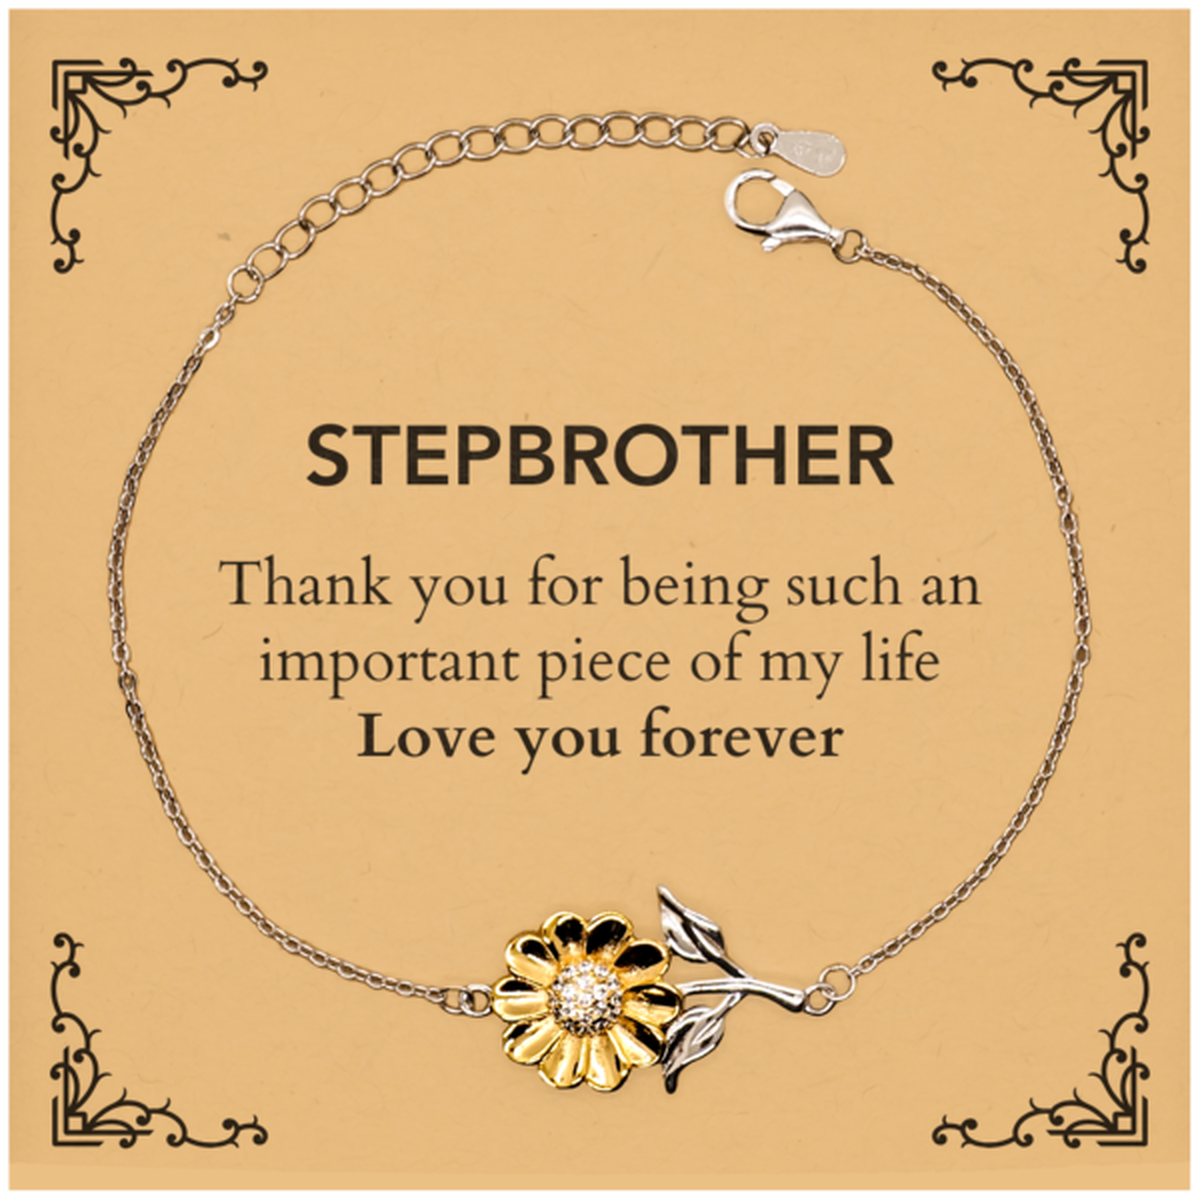 Appropriate Stepbrother Sunflower Bracelet Epic Birthday Gifts for Stepbrother Thank you for being such an important piece of my life Stepbrother Christmas Mothers Fathers Day